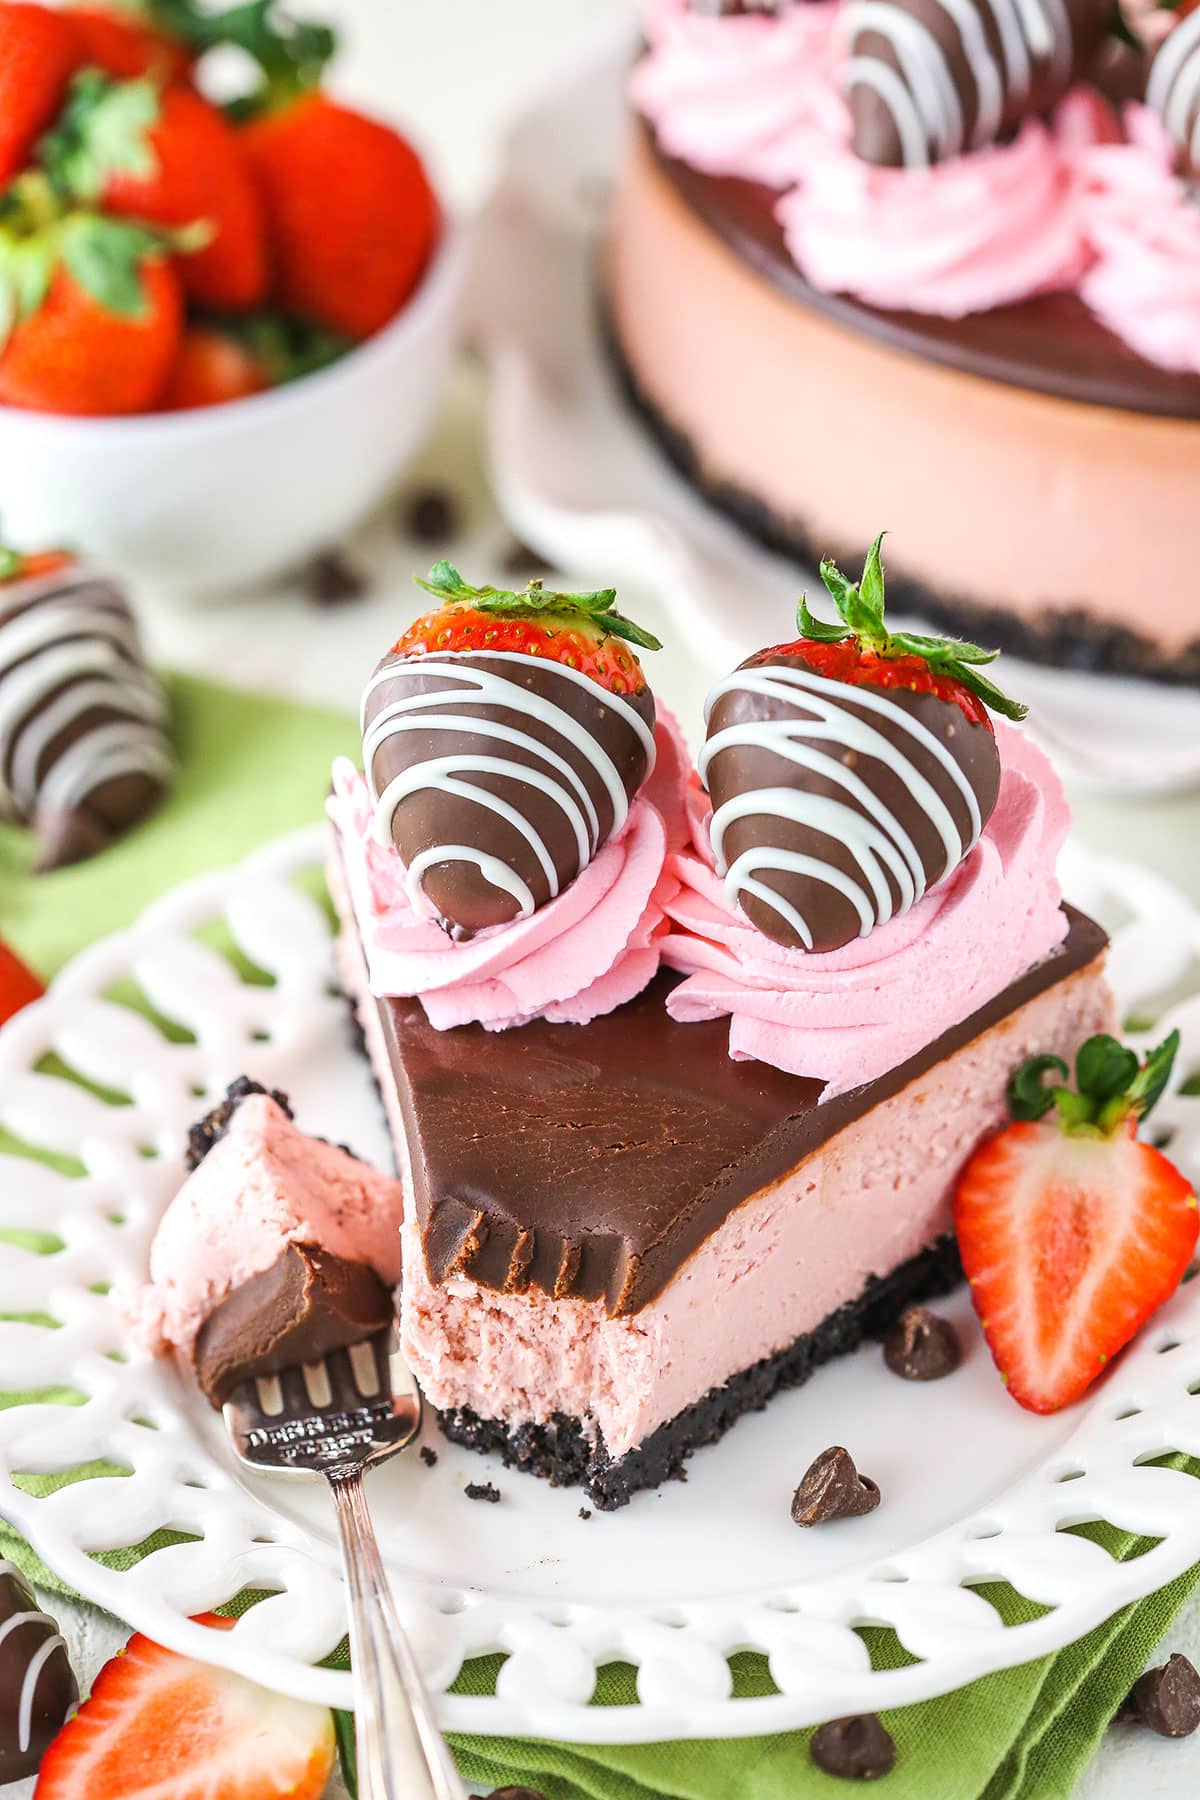 A slice of Chocolate Covered Strawberry Cheesecake with a bite removed next to a silver fork on a white plate